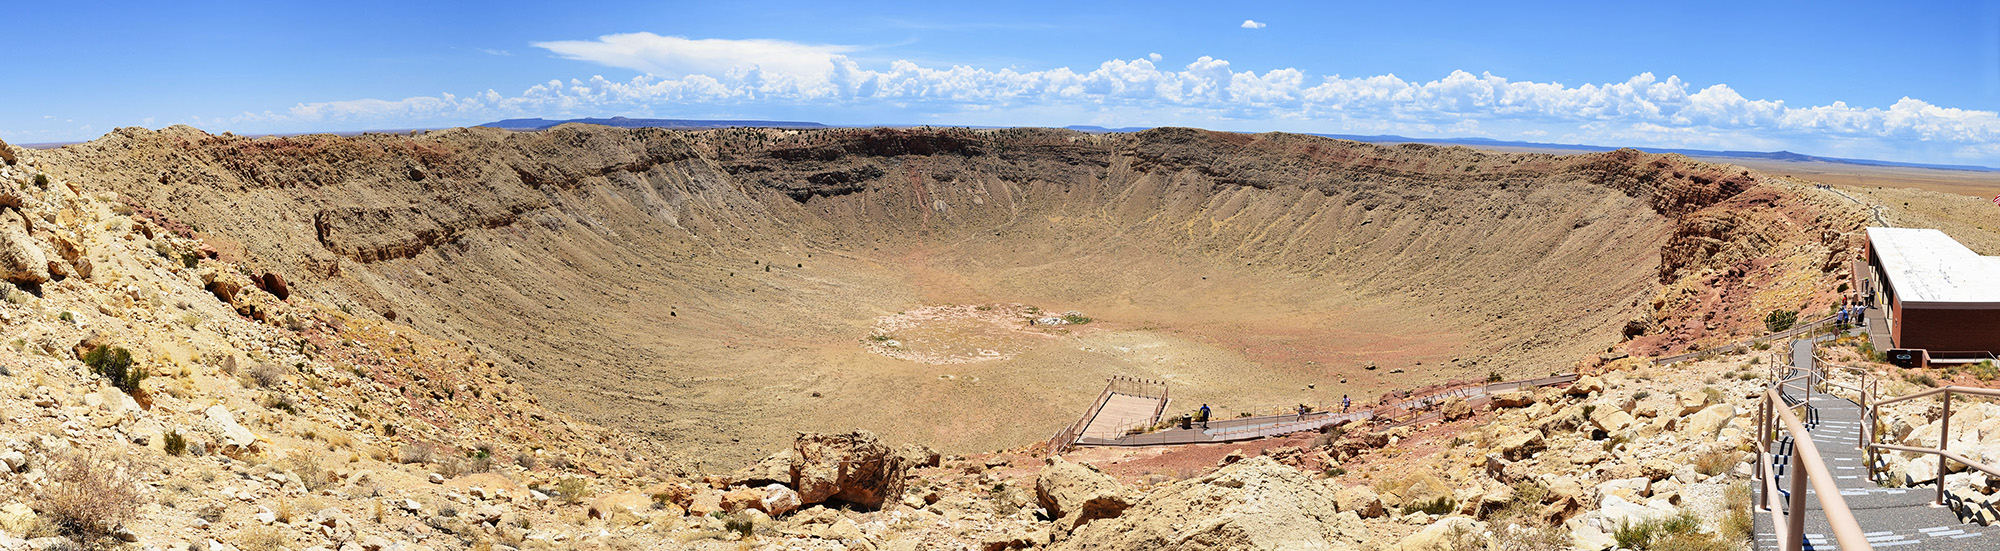 Panoramic photo of a arid crater